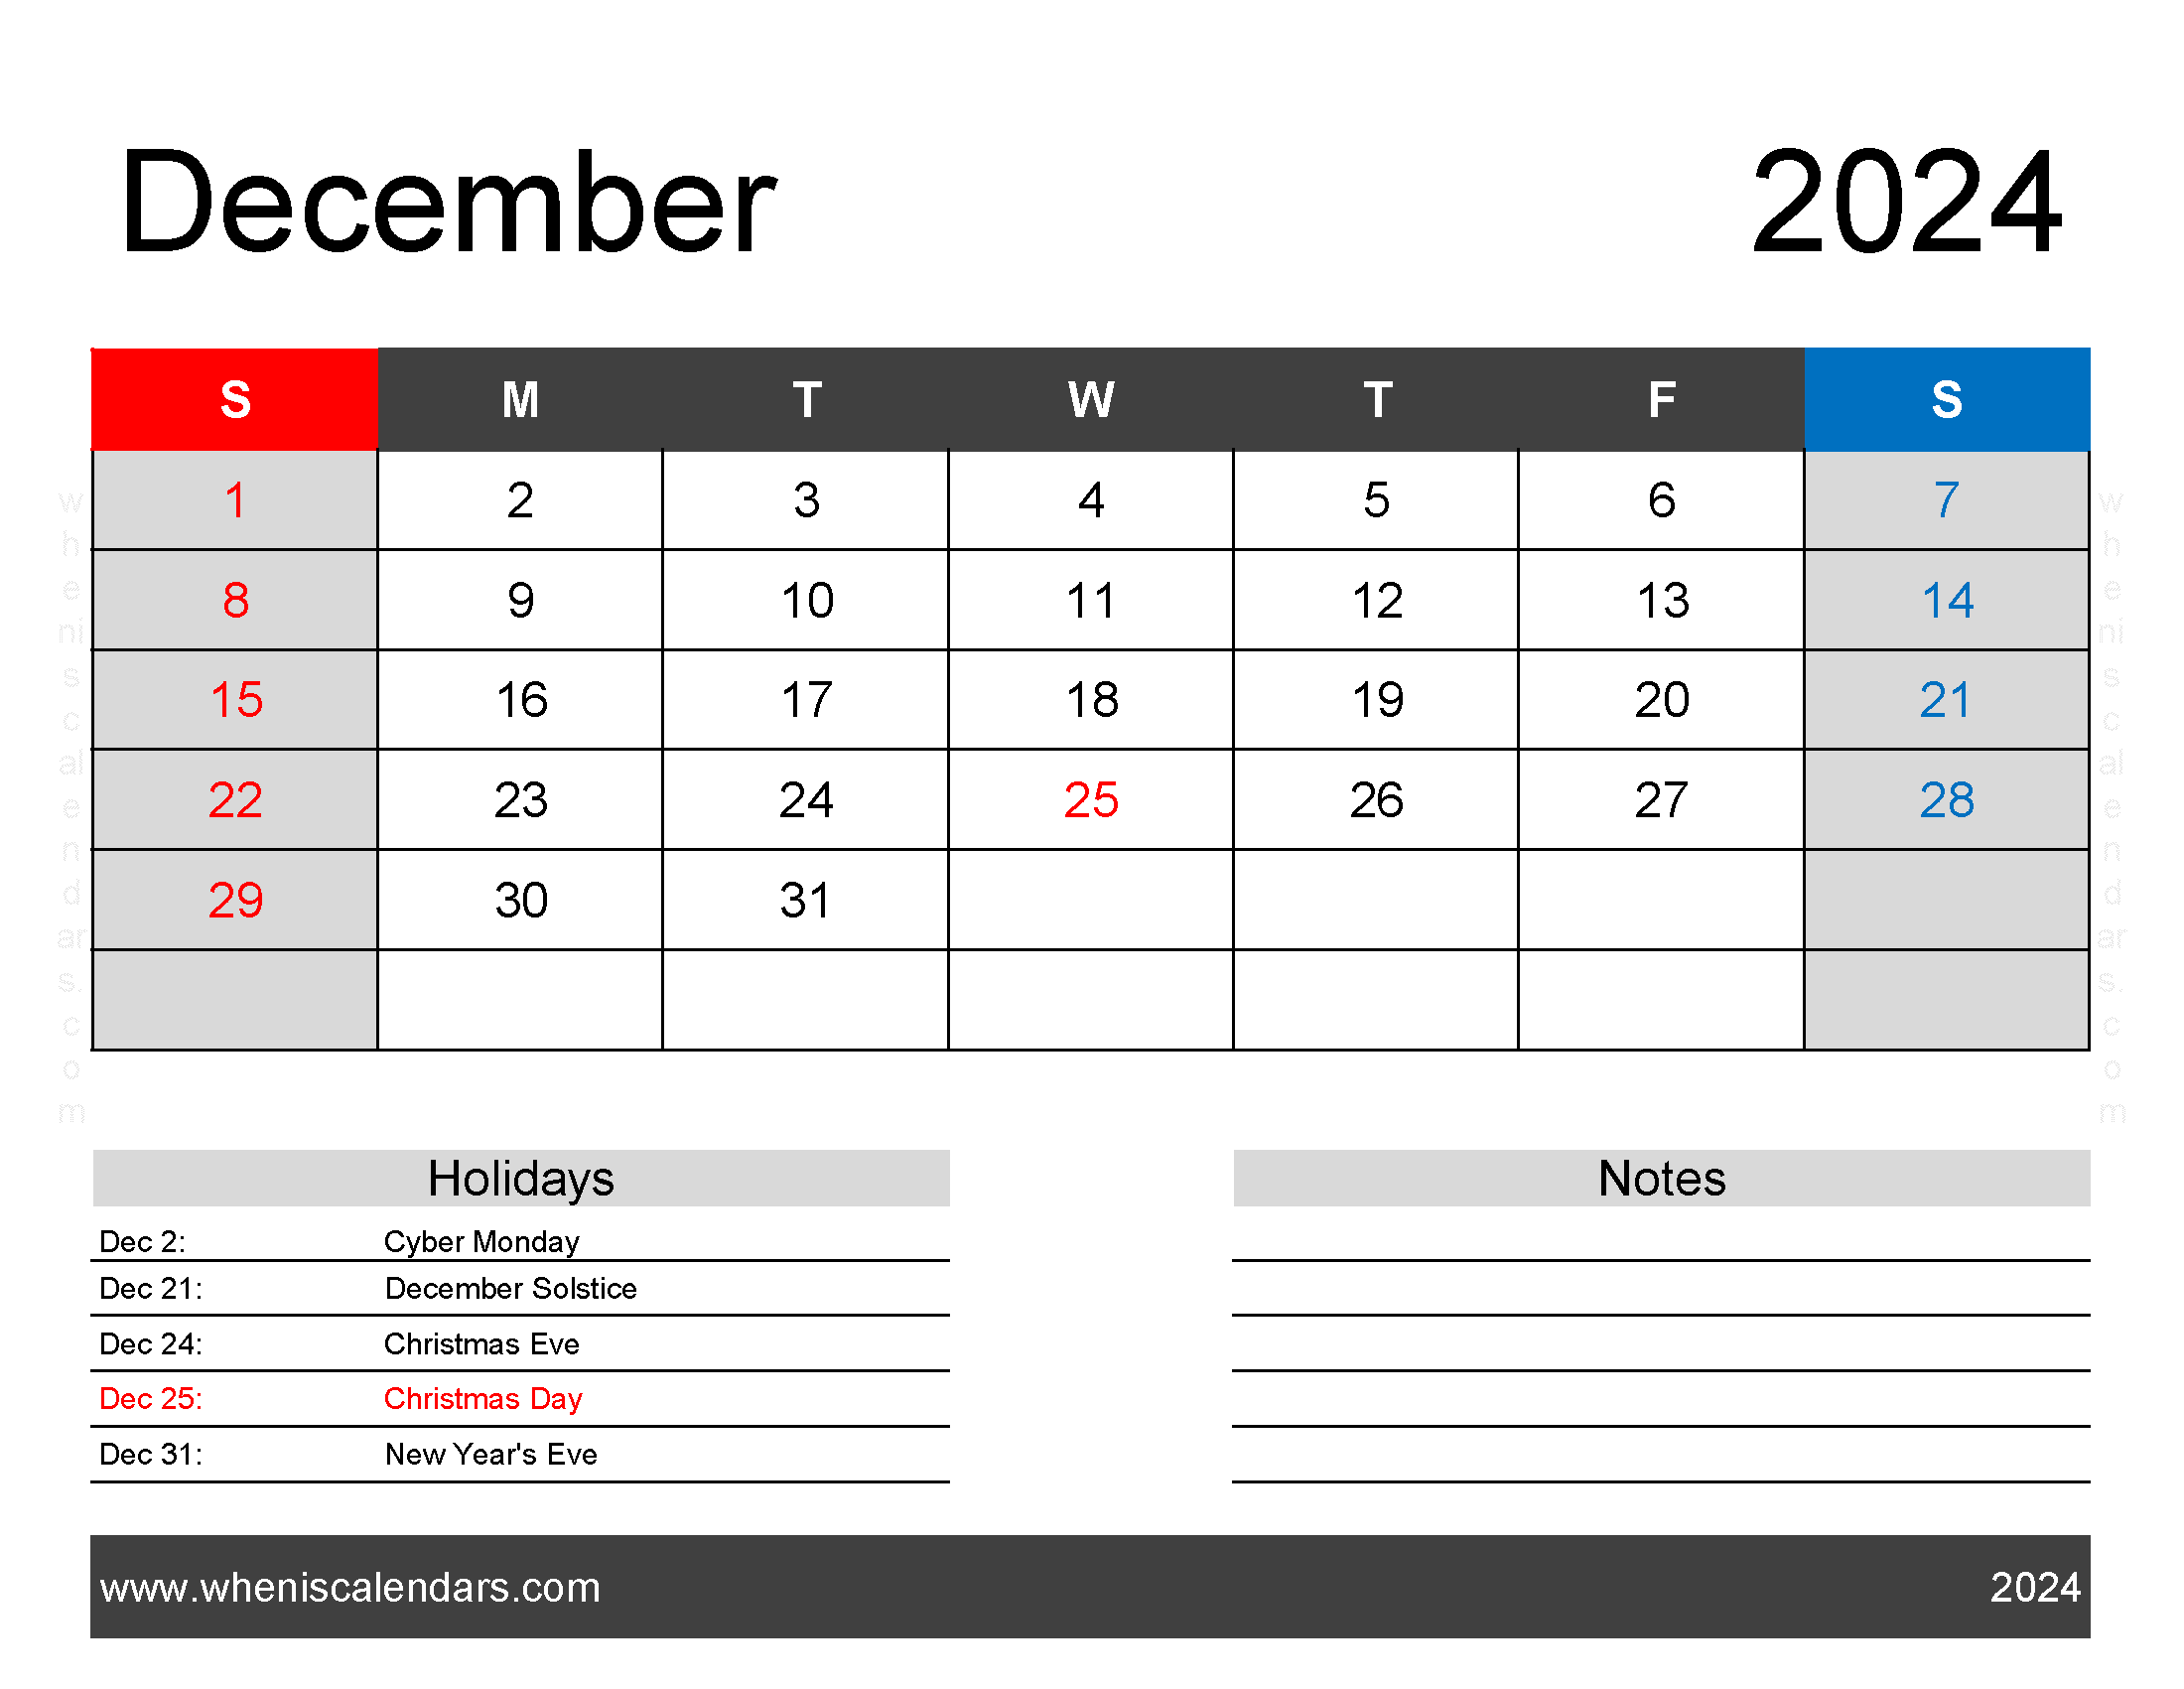 Download free December Calendar 2024 with Holidays printable